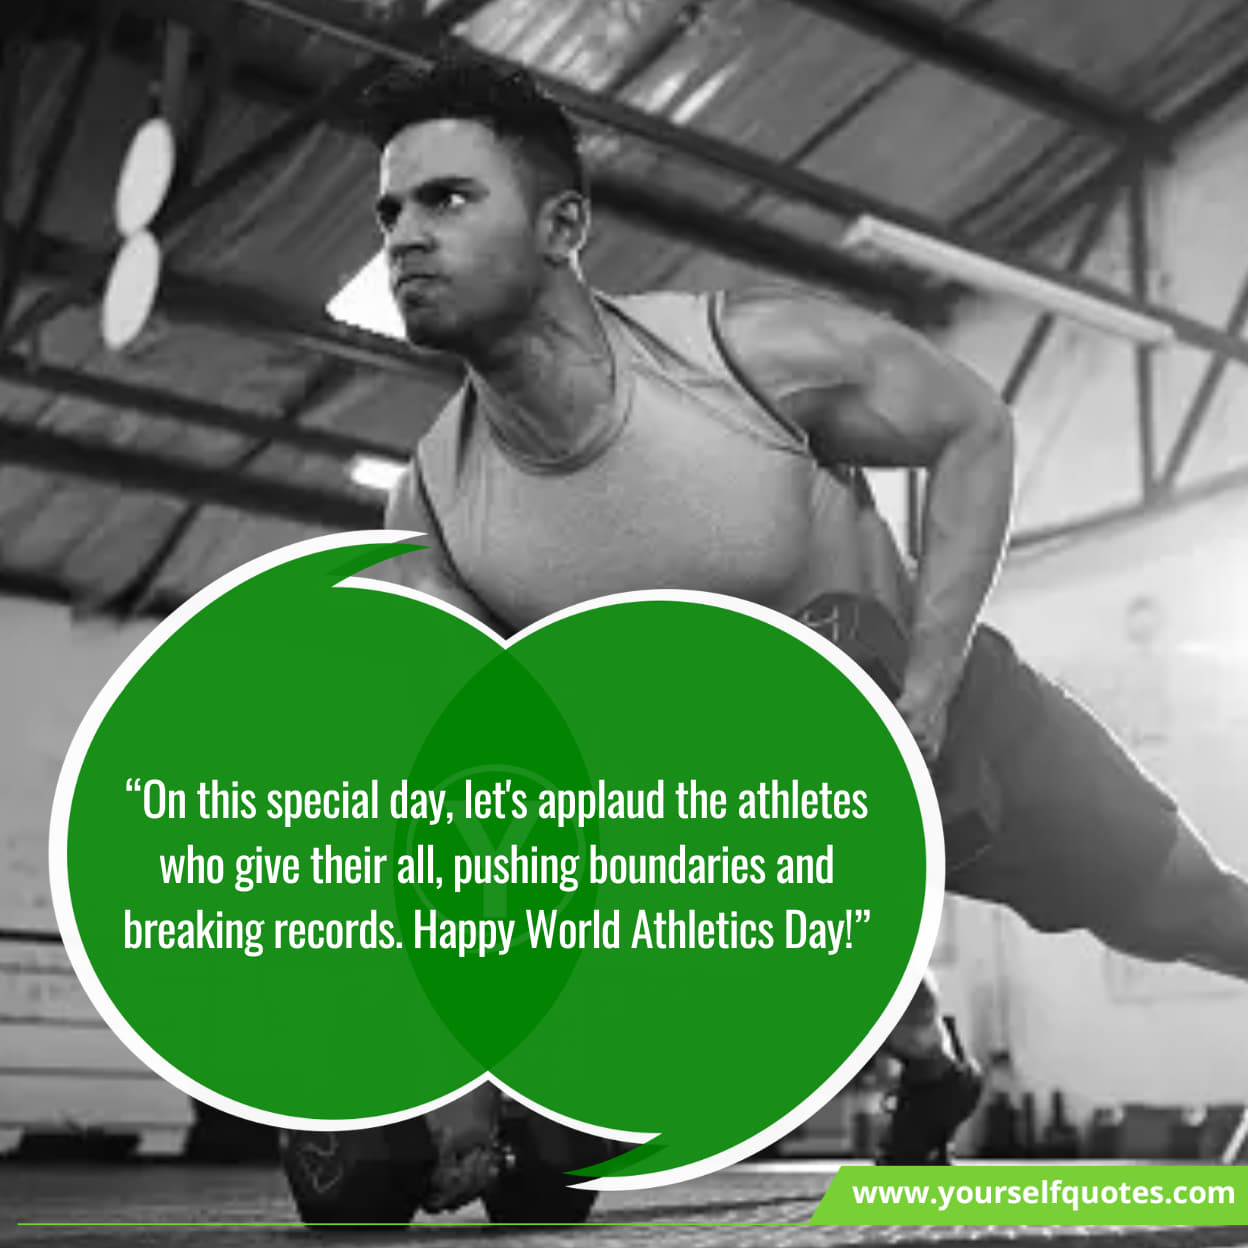 Inspirational quotes for World Athletics Day